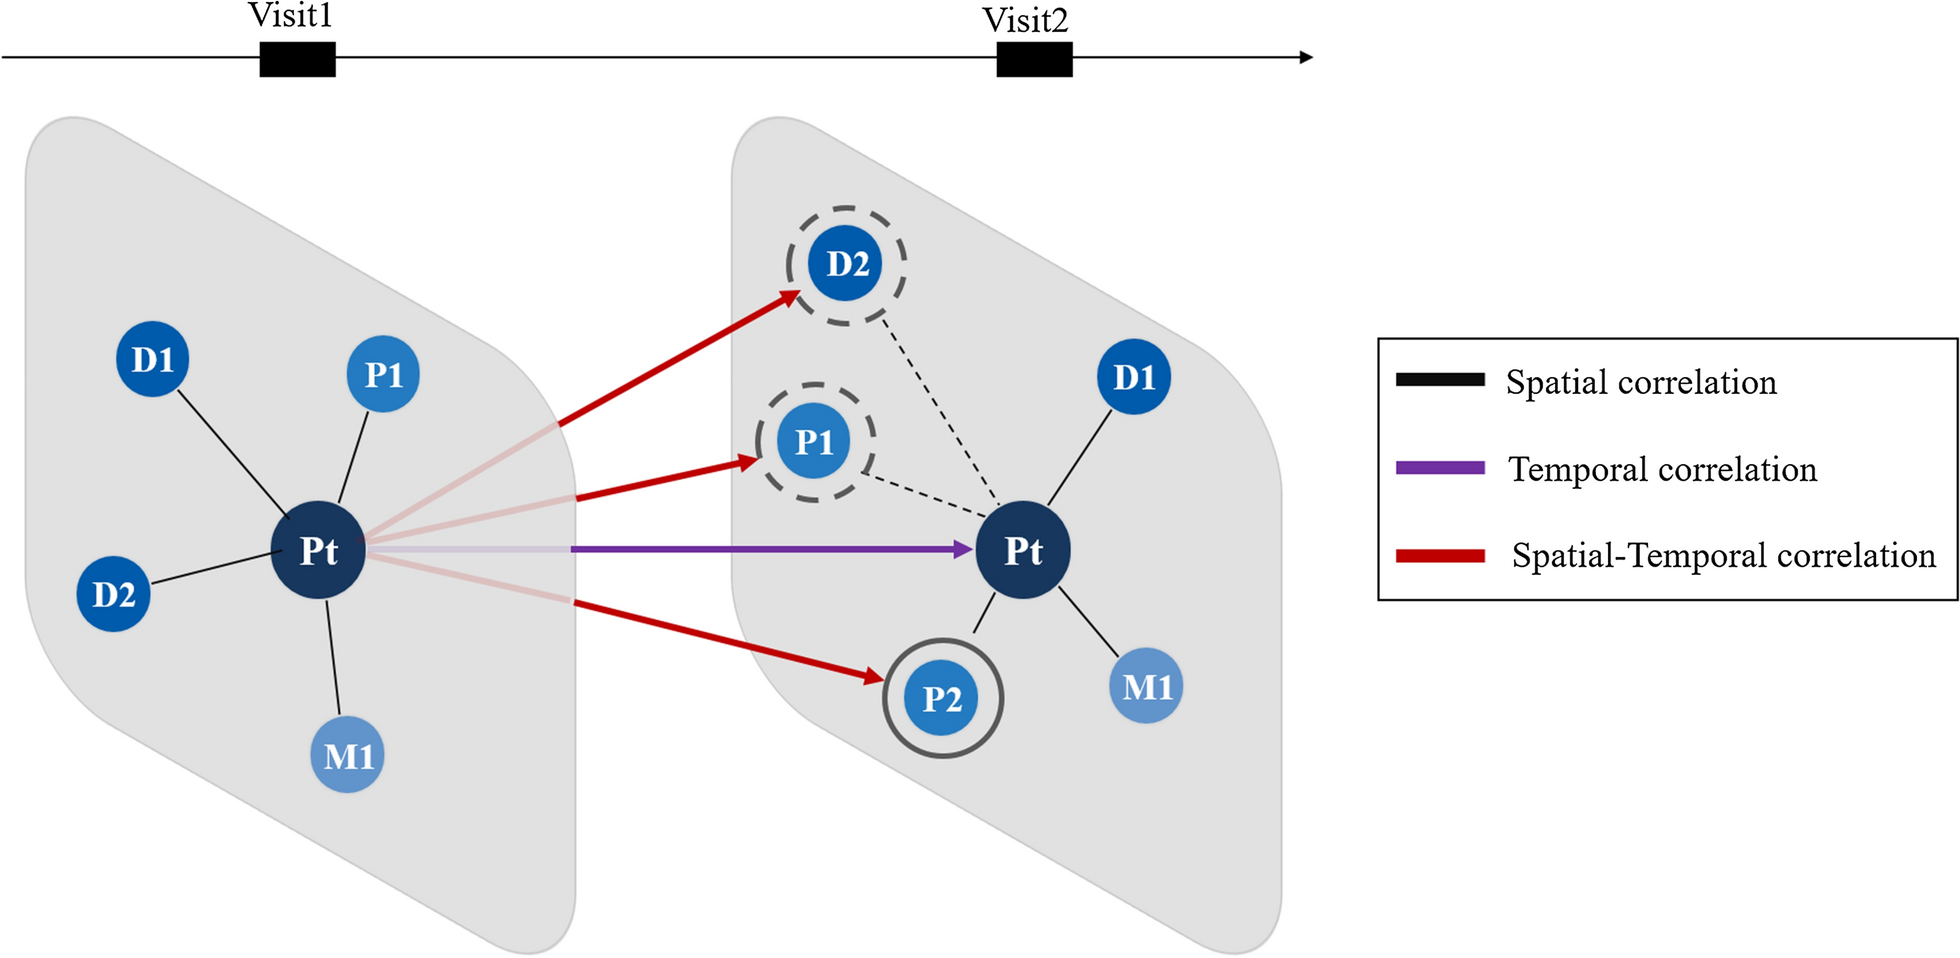 Mdpg: a novel multi-disease diagnosis prediction method based on patient knowledge graphs